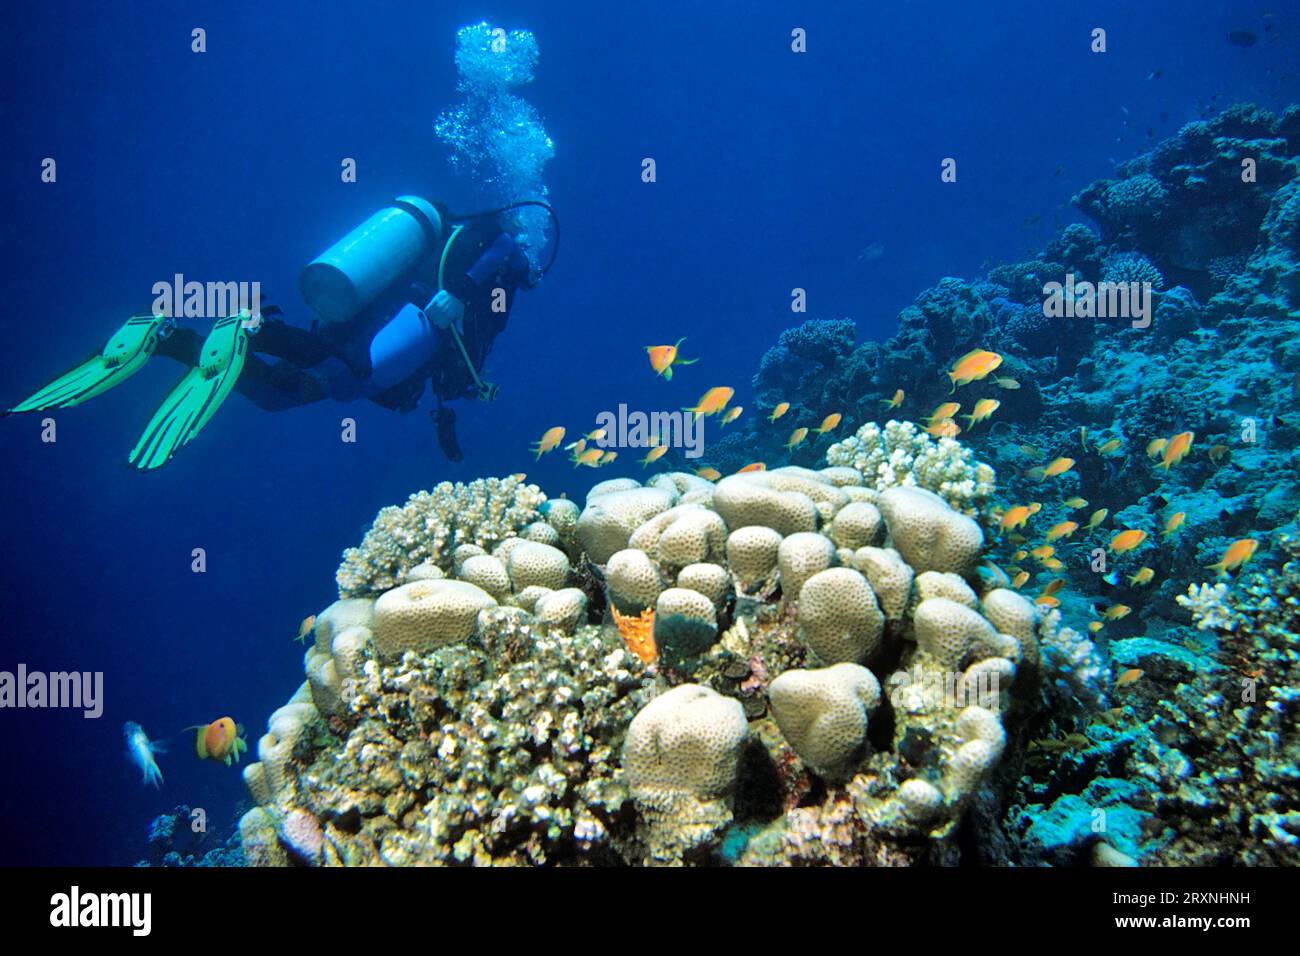 Scuba diver underwater on coral reef, Red Sea, Egypt Stock Photo